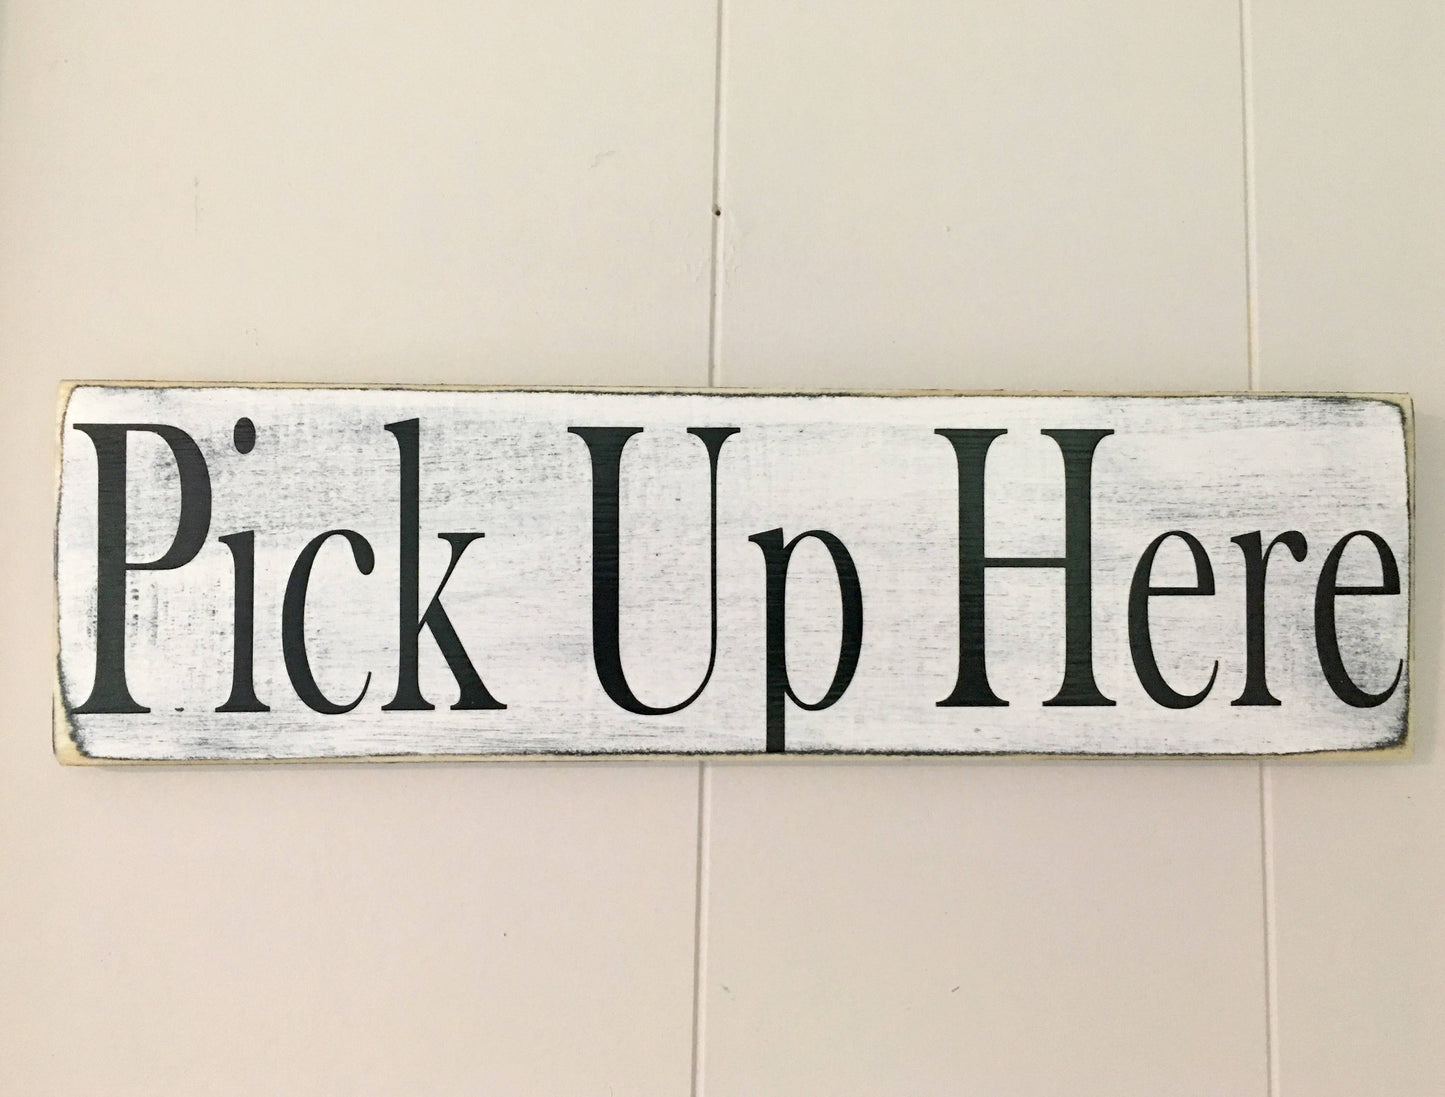 14x4 Pick Up Here Wood Restaurant Coffee Shop Business Sign